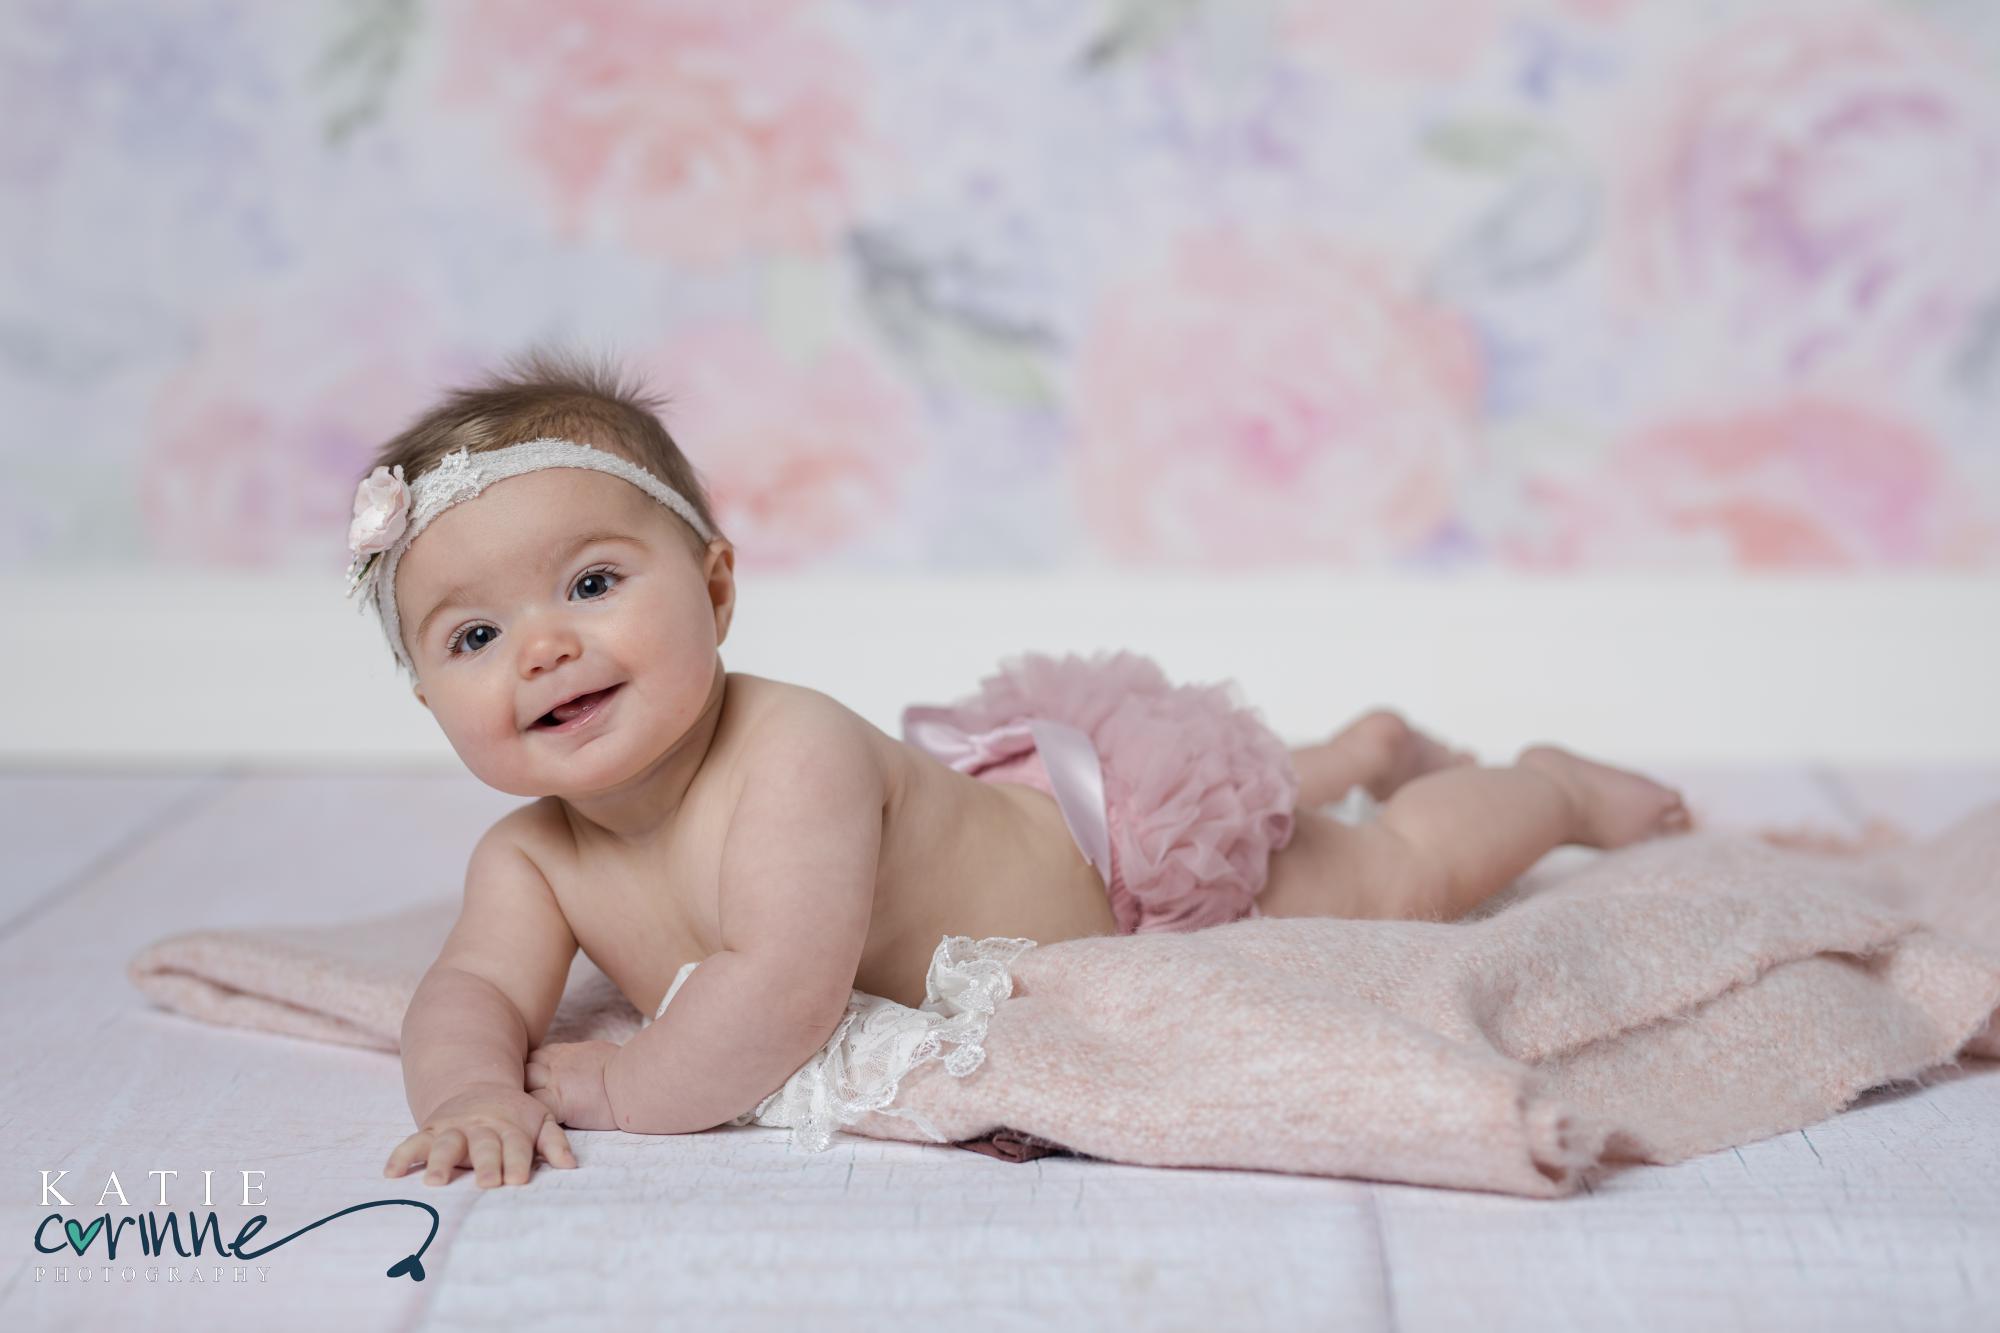 6 month Baby against floral backdrop